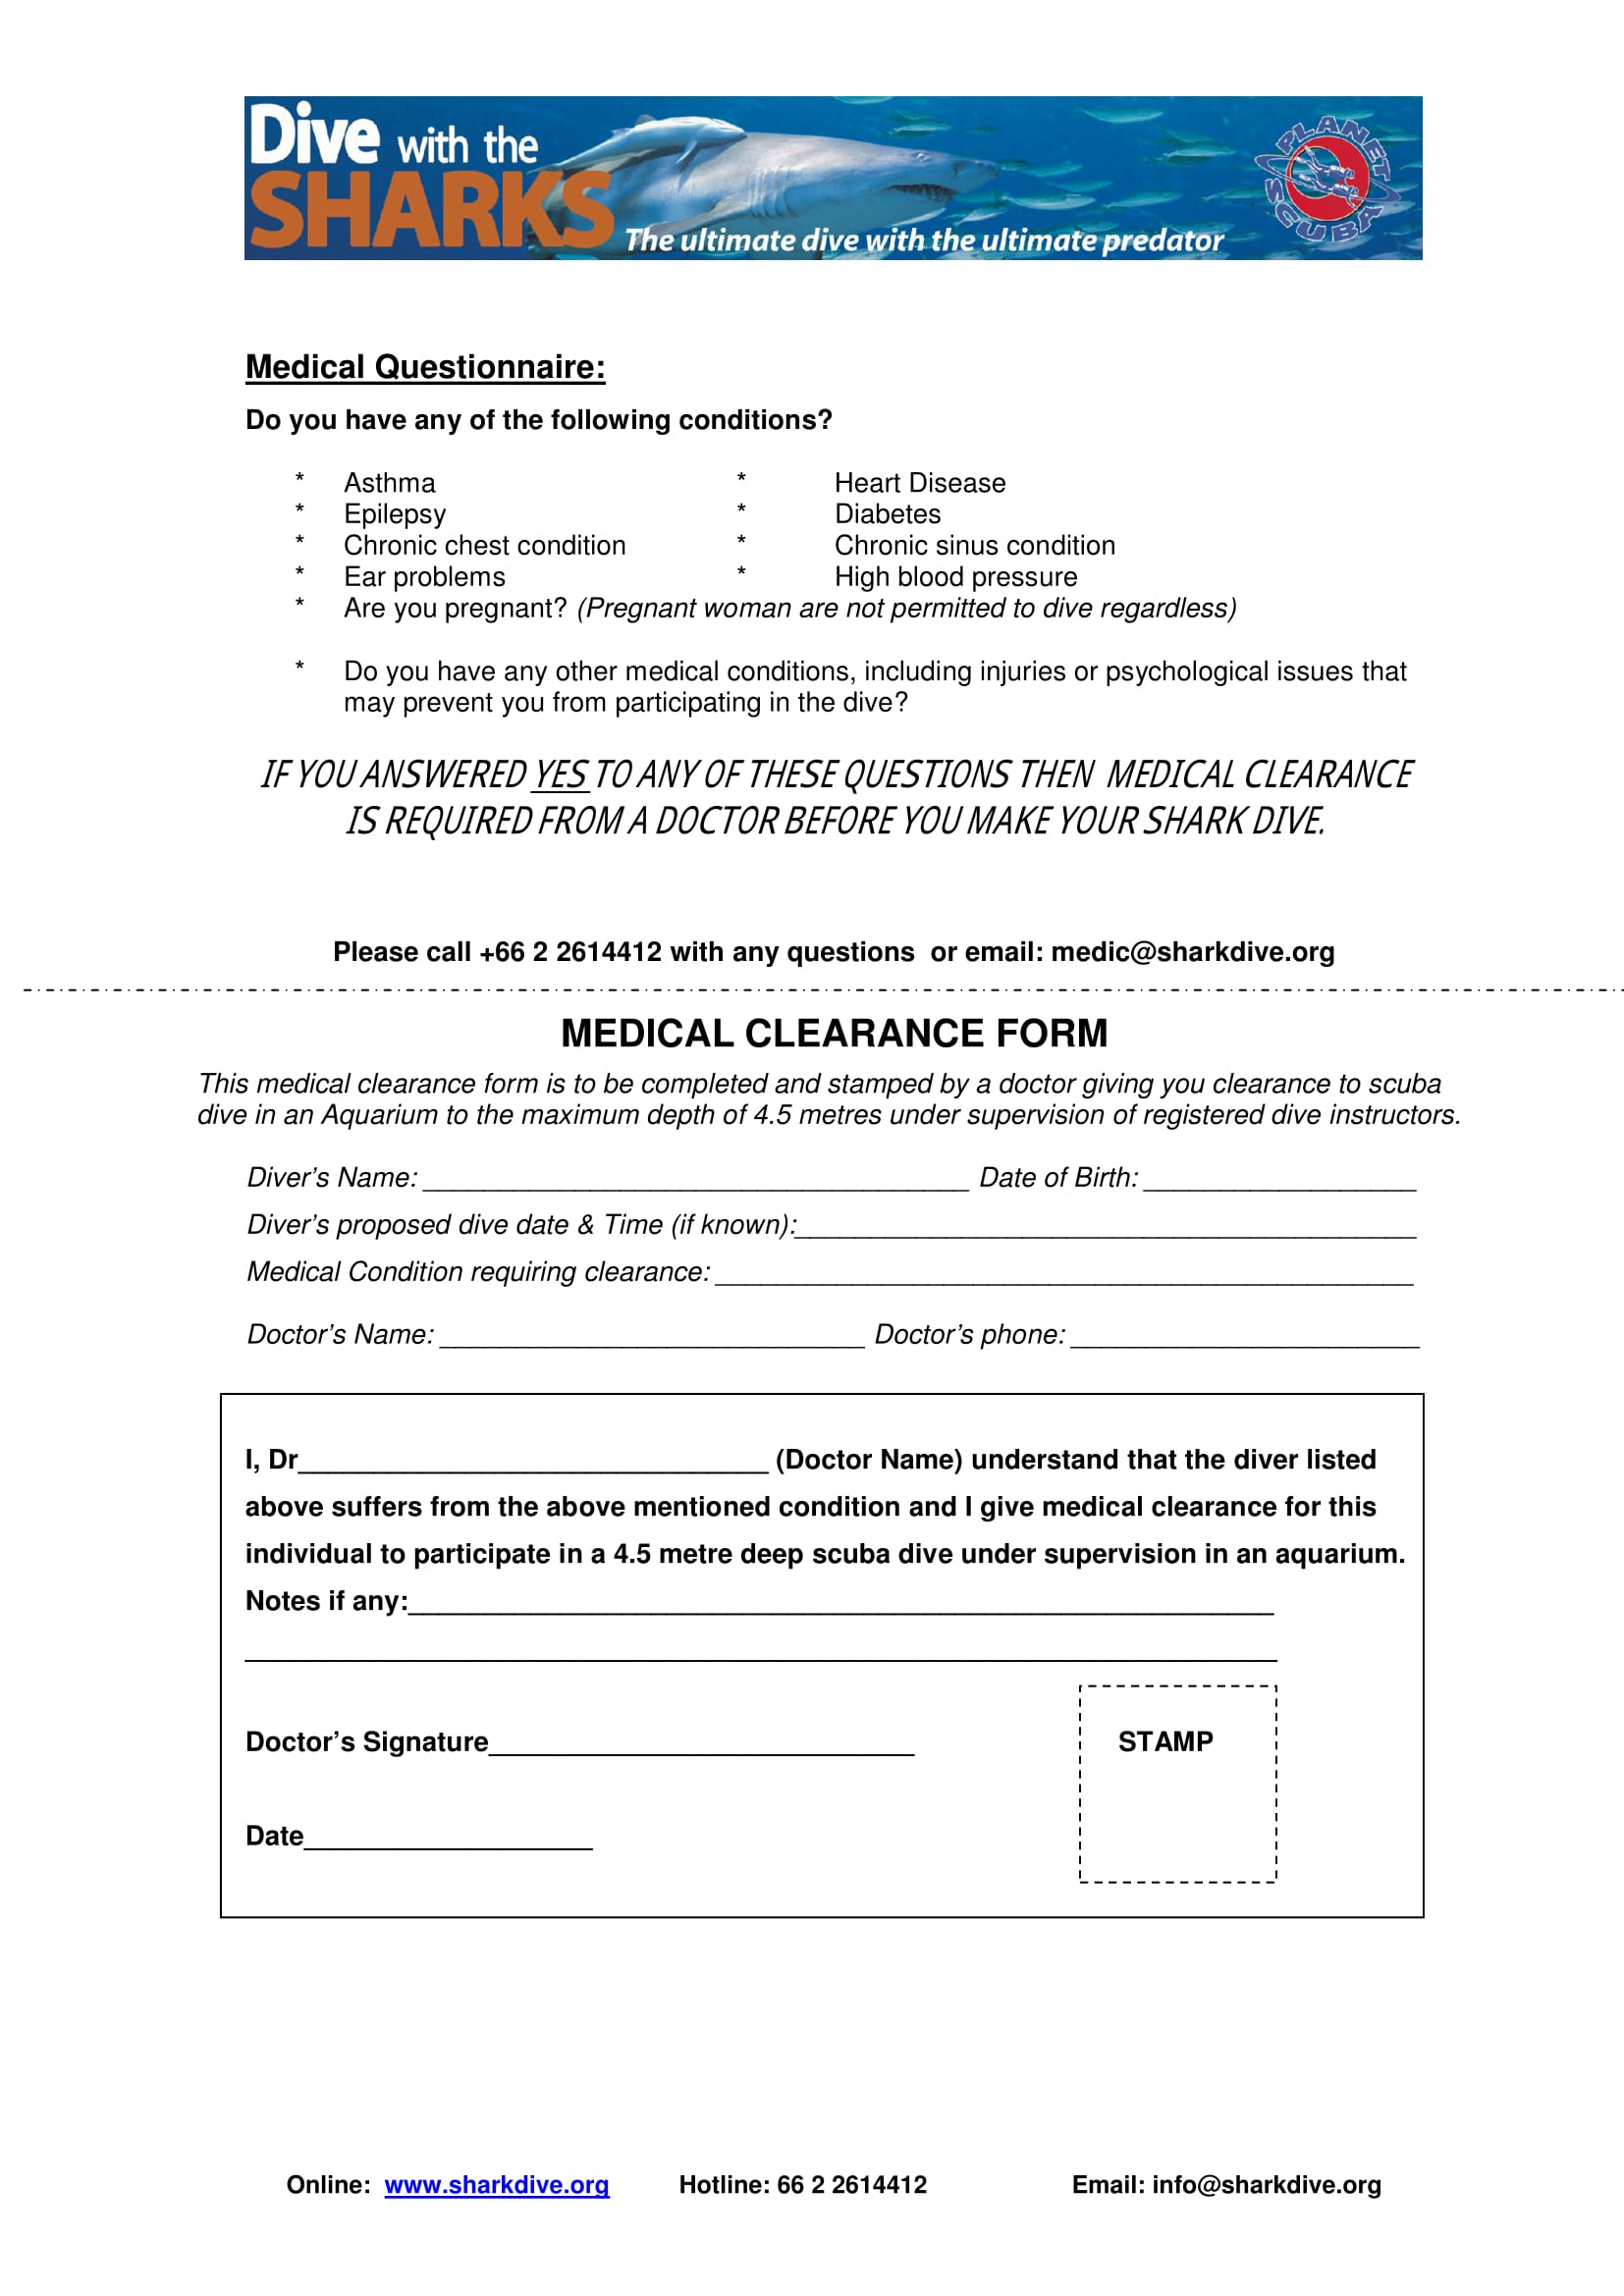 diver medical clearance form 1